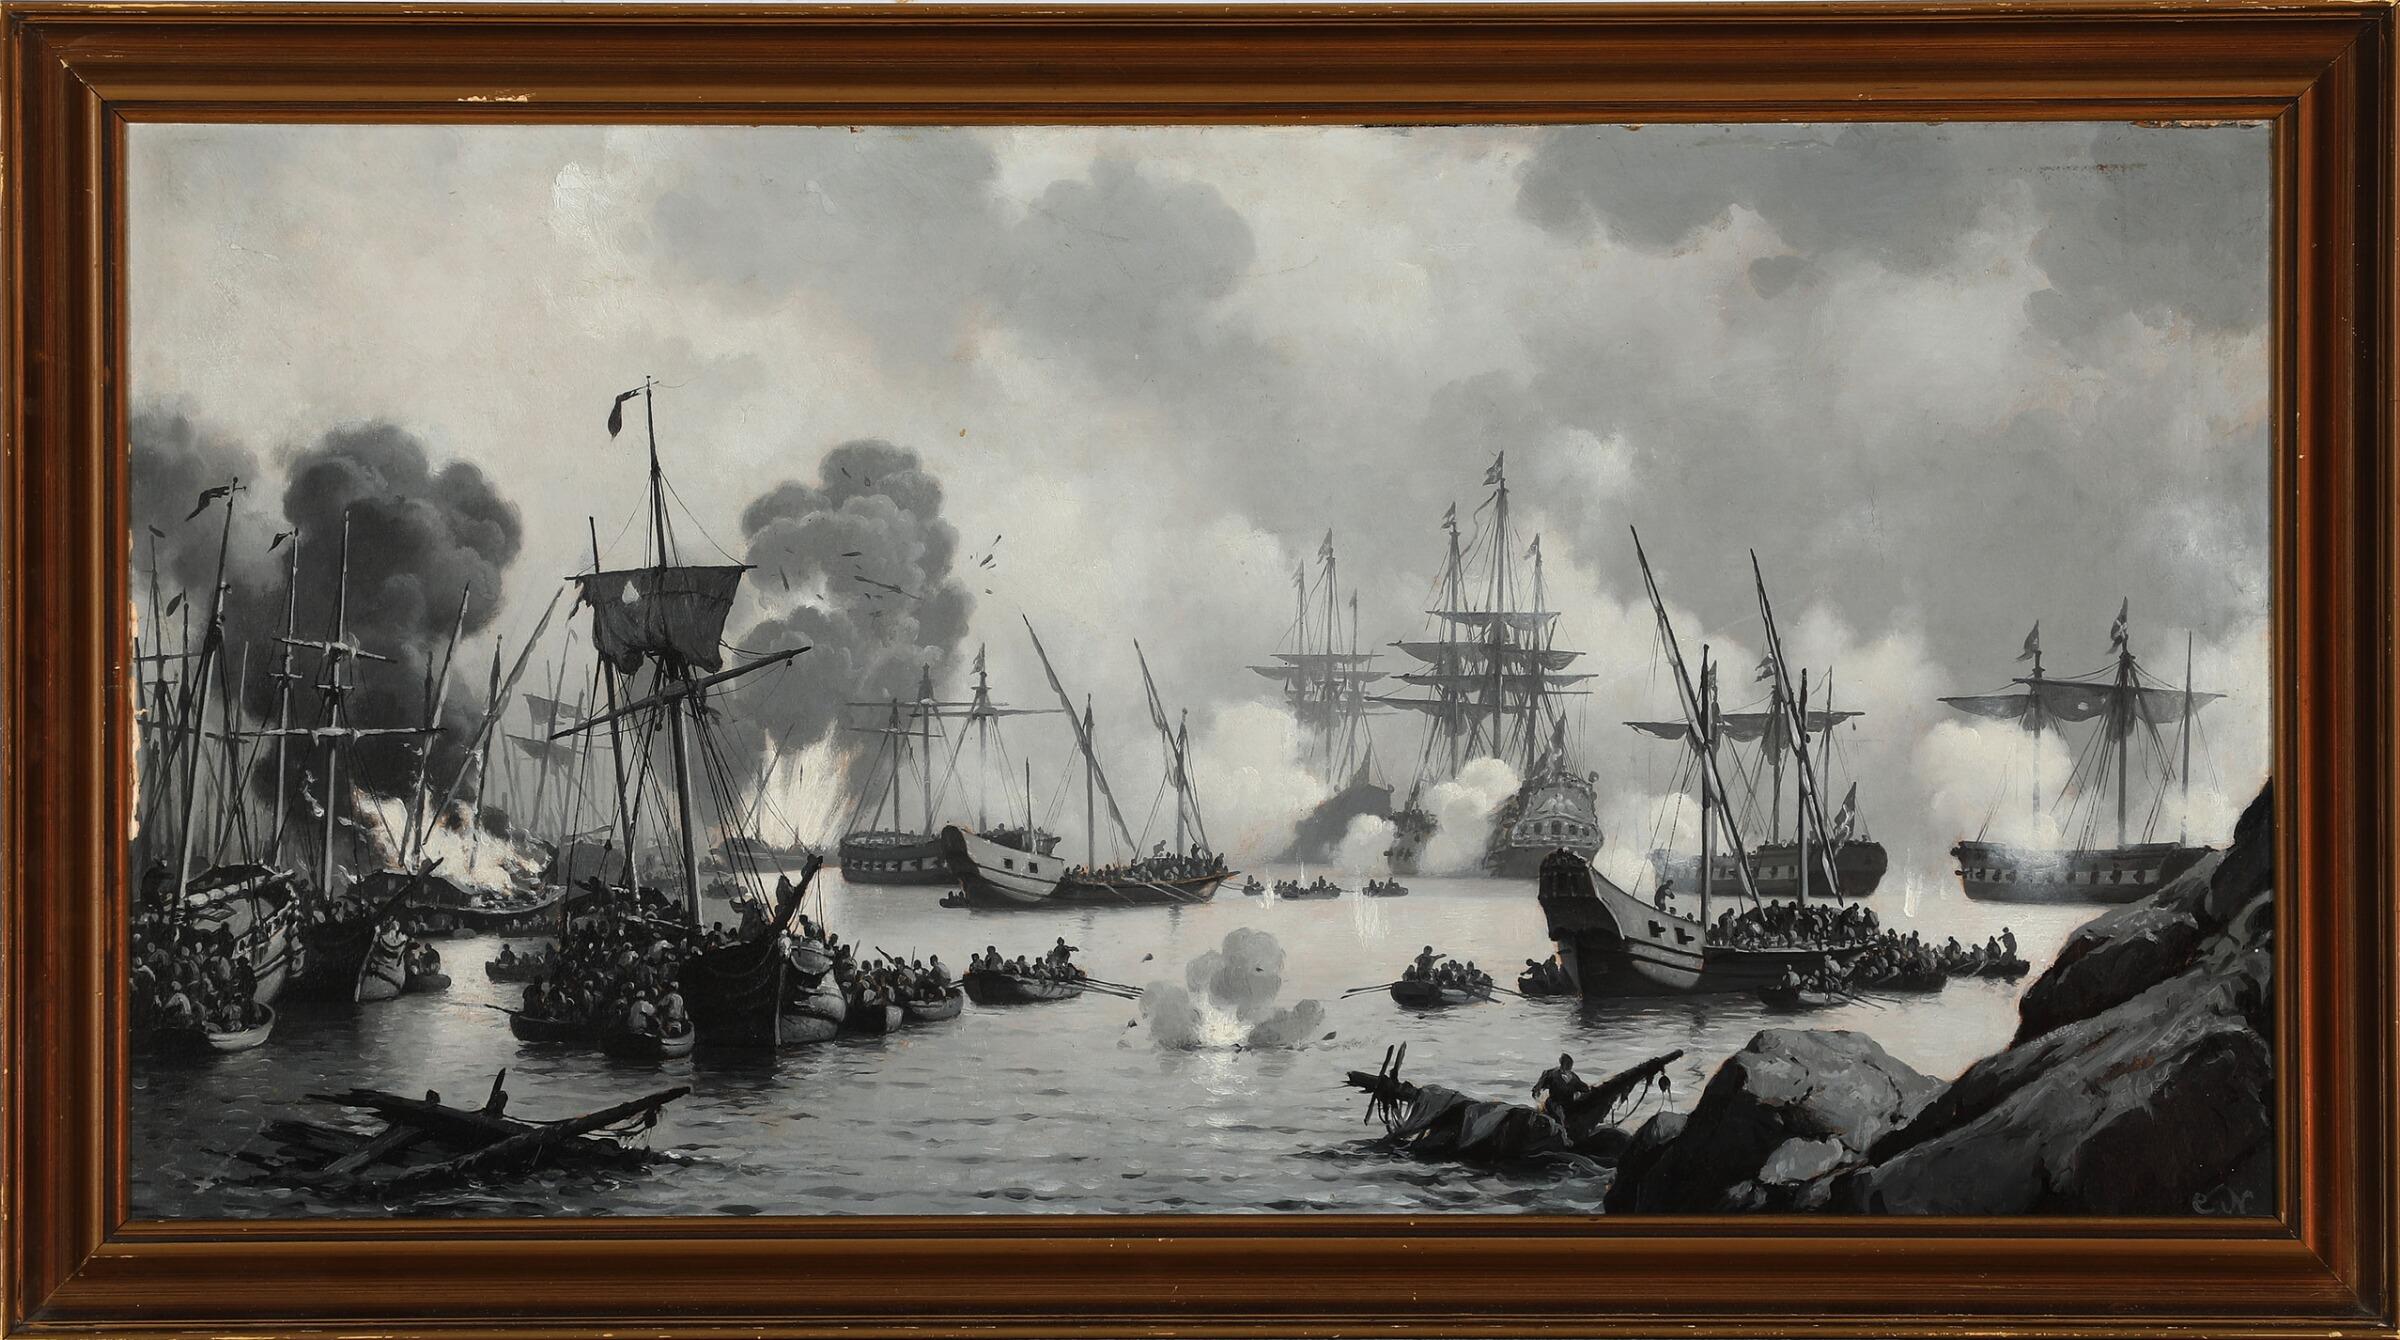 Carl Neumann oil on paper mounted on canvas. The battle of Dynekilen, during the Great Northern War, is one of the most famous naval battles in Danish military history. During the battle, Tordenskjold, a Danish Vice-Admiral managed to destroy